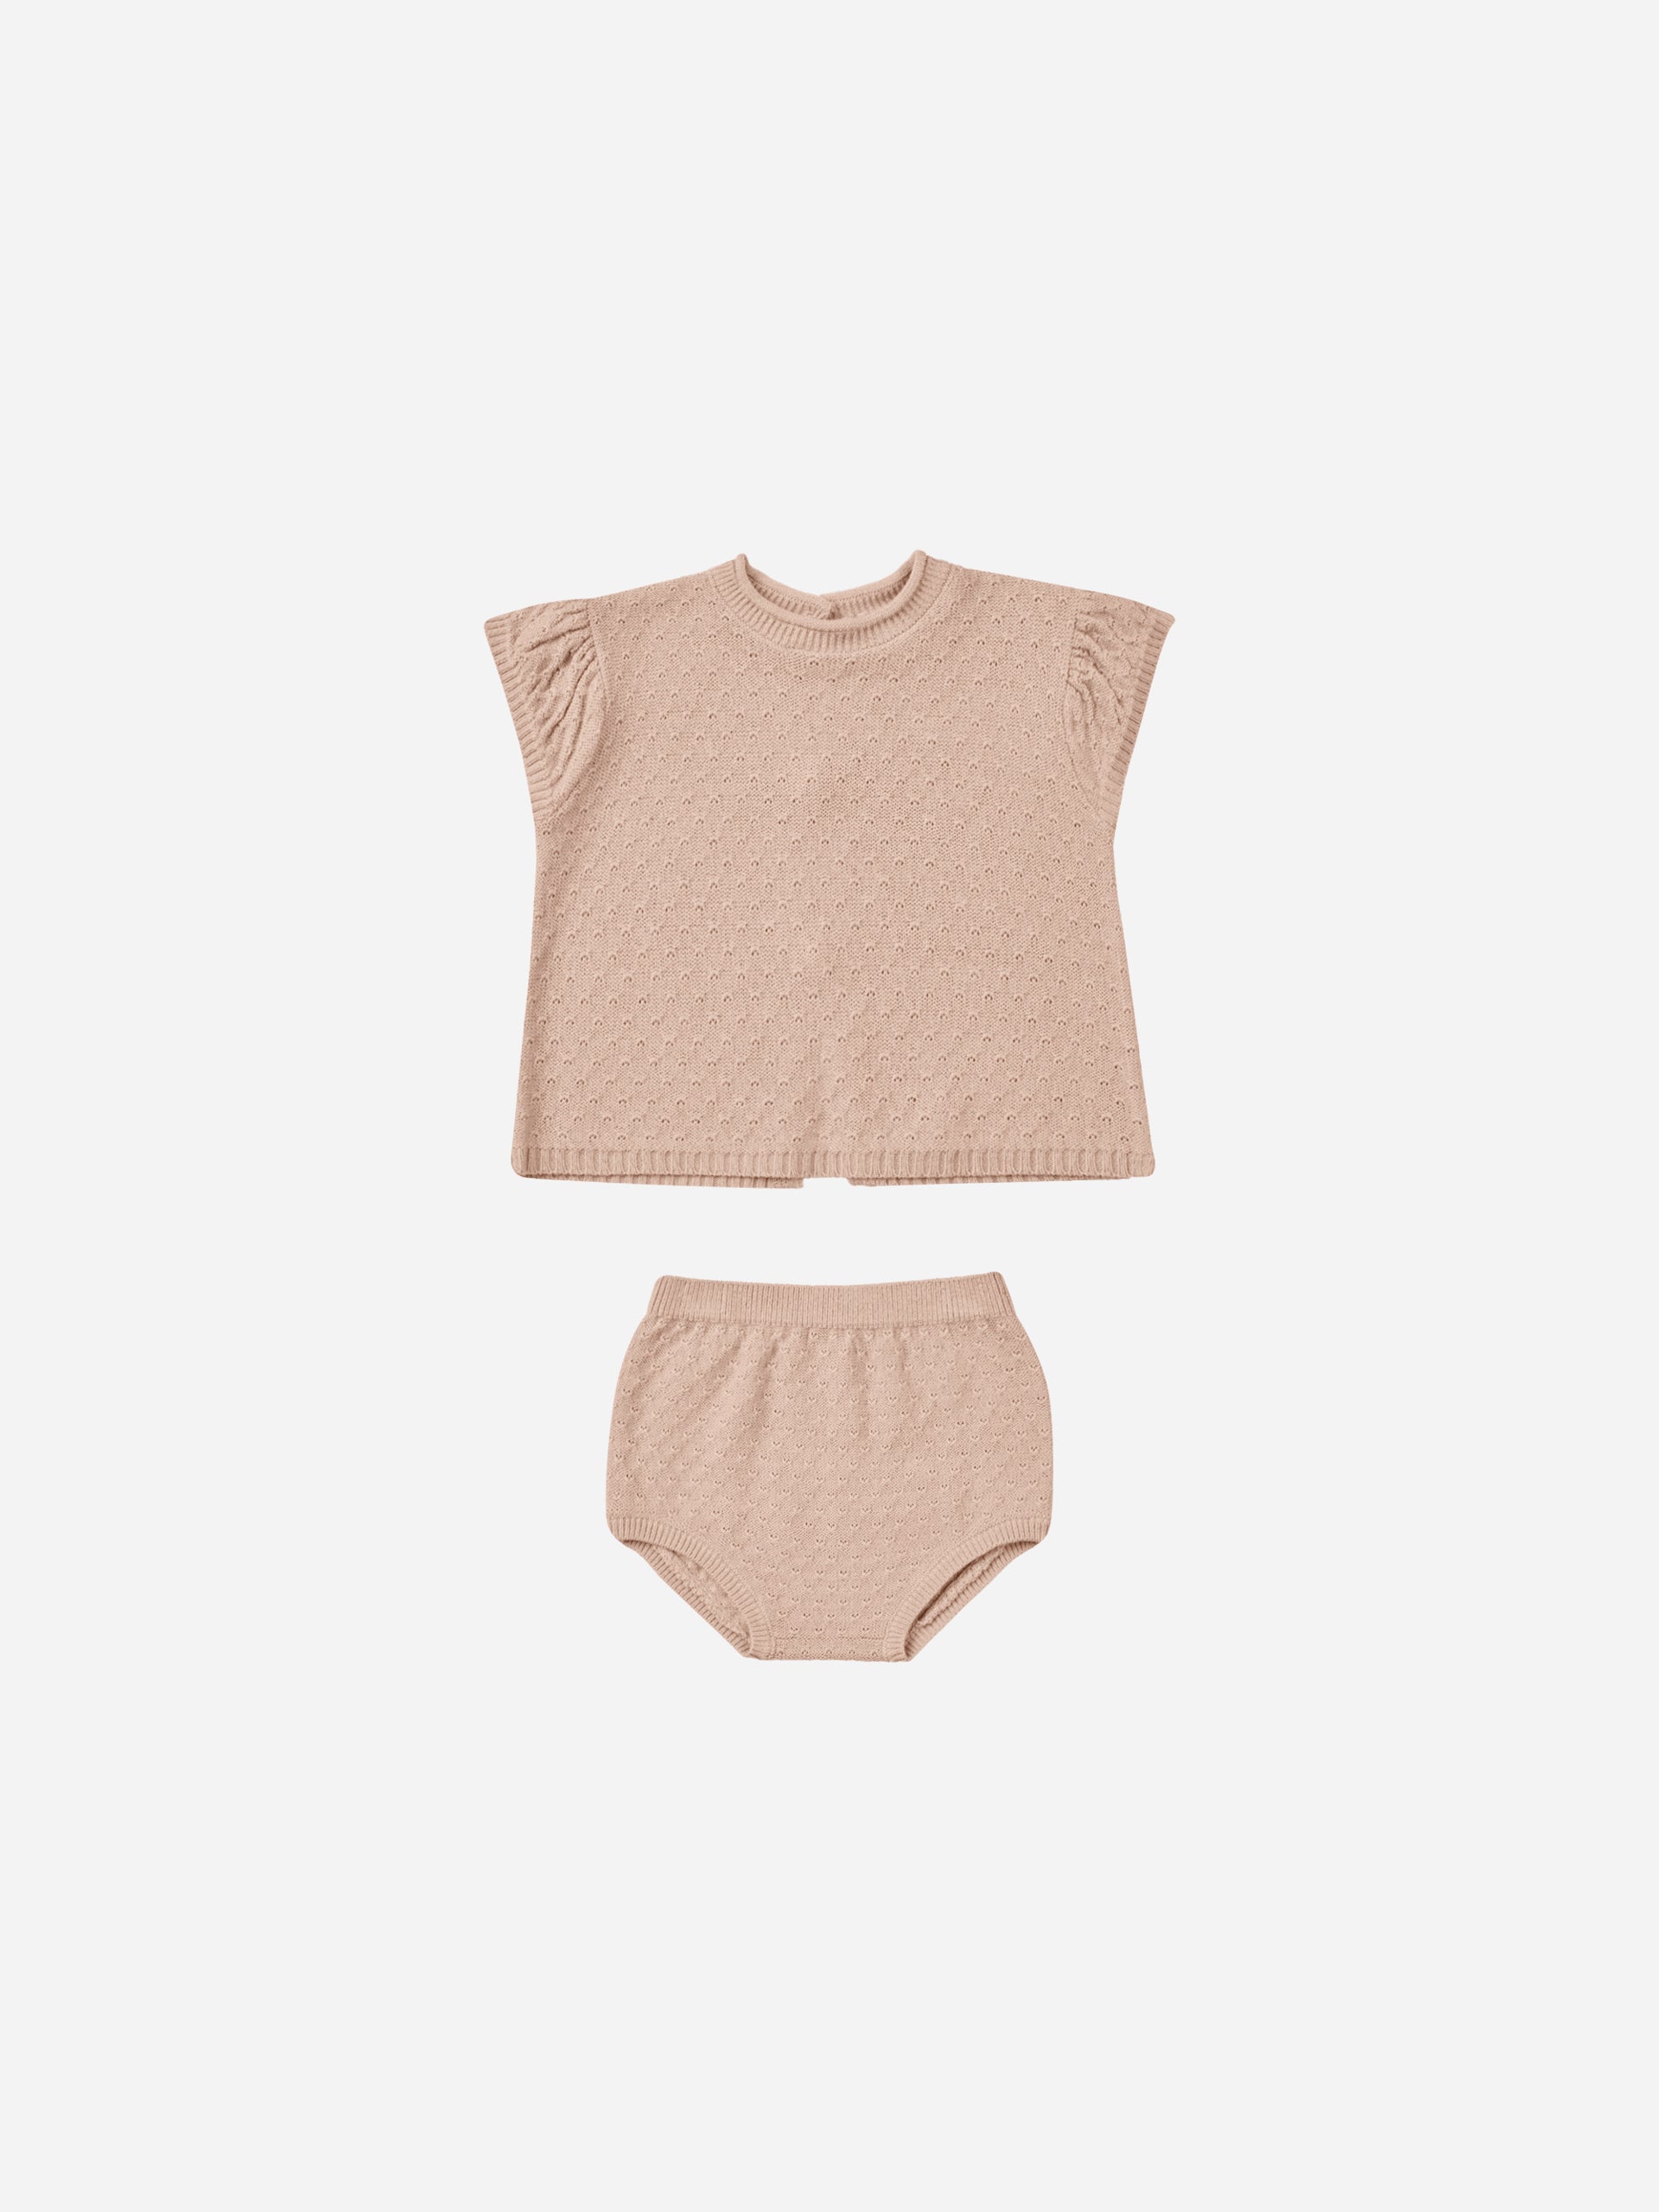 Penny Knit Set || Blush - Rylee + Cru | Kids Clothes | Trendy Baby Clothes | Modern Infant Outfits |